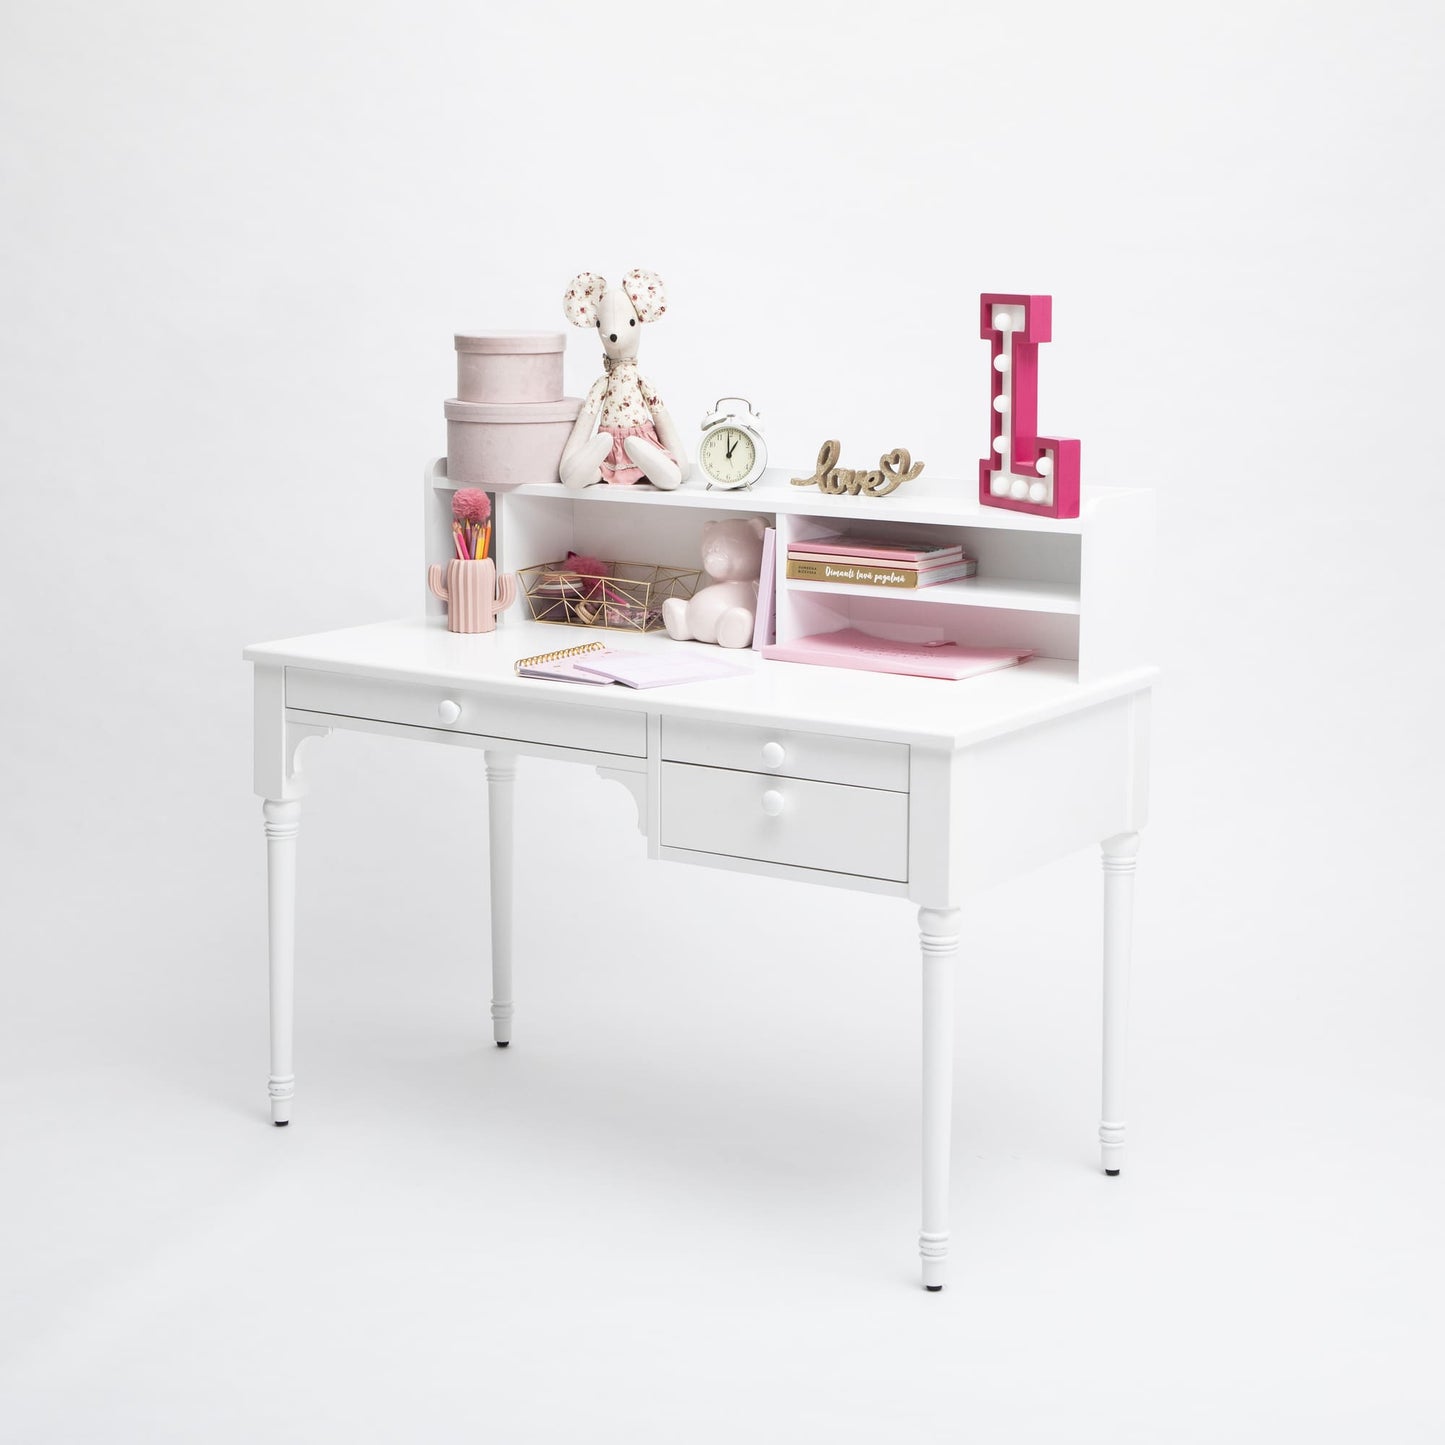 A tidy white versatile Pedestal desk with drawers, accessorized with pink and white objects including books, boxes, a stuffed toy, and a large letter 'L'.